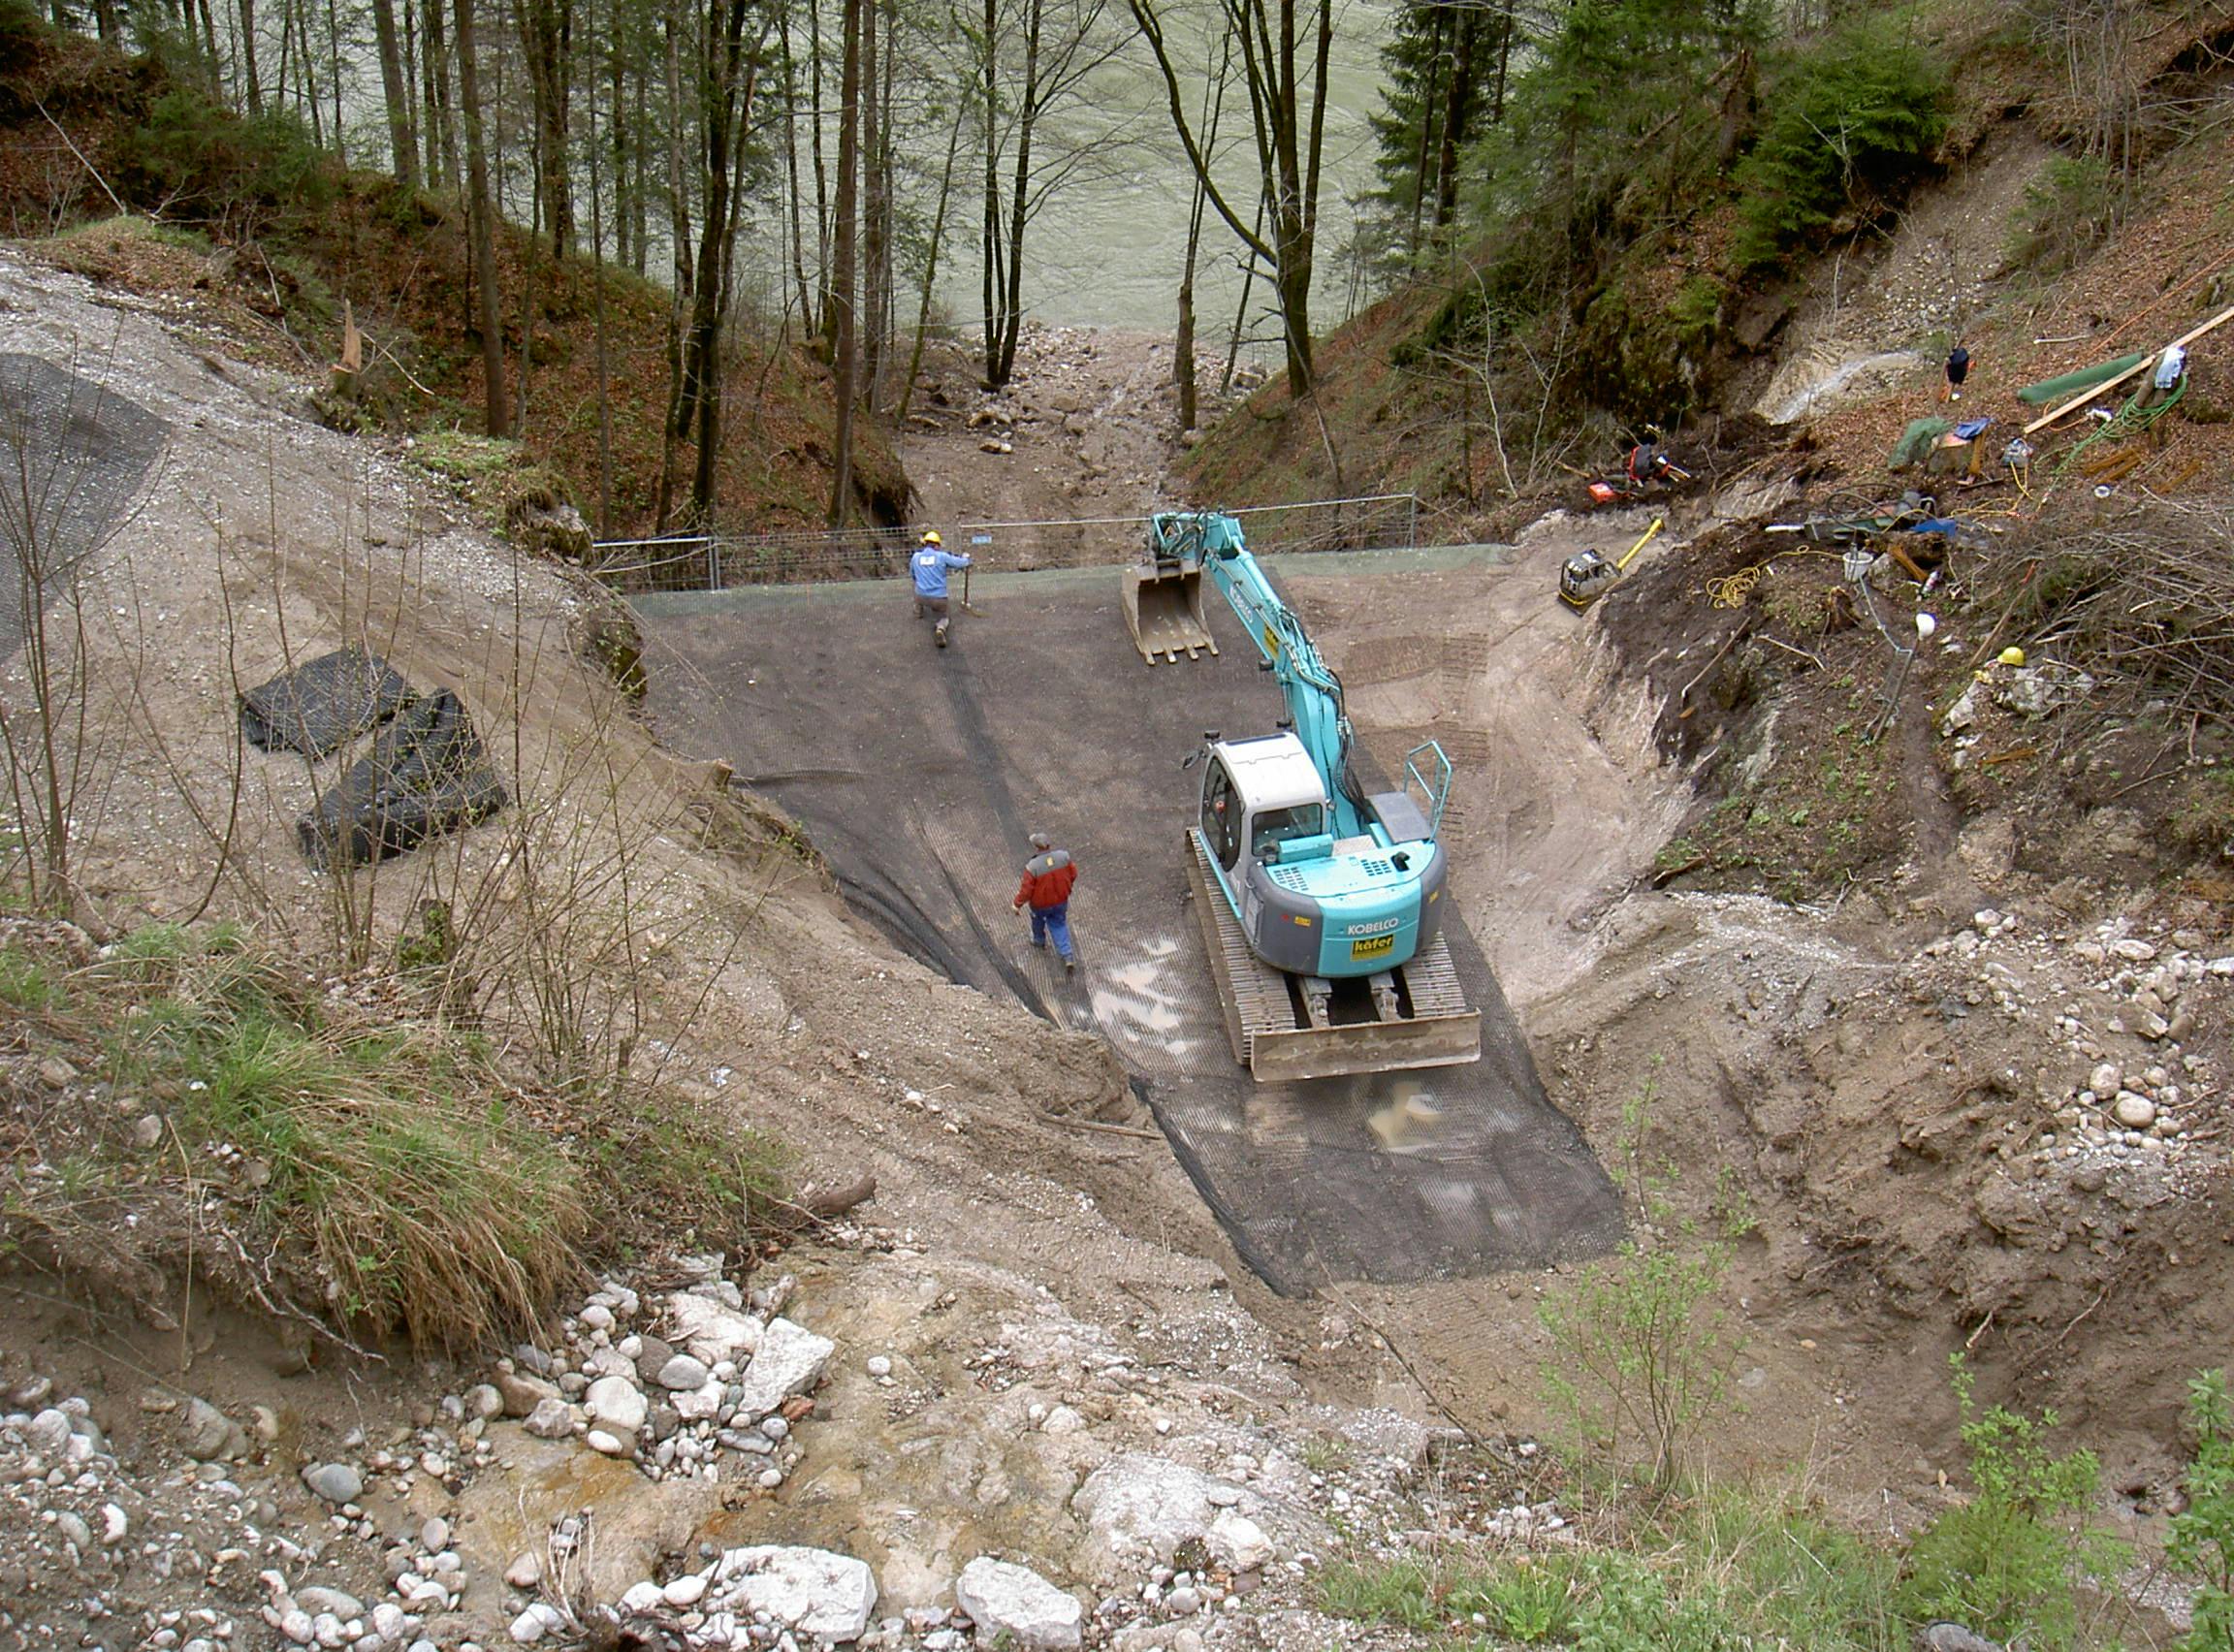 Due to increased traffic loadings and seepage problems, a section of the B115 highway in the mountains of Styria, Austria, was showing considerable distress and was in danger of failure.